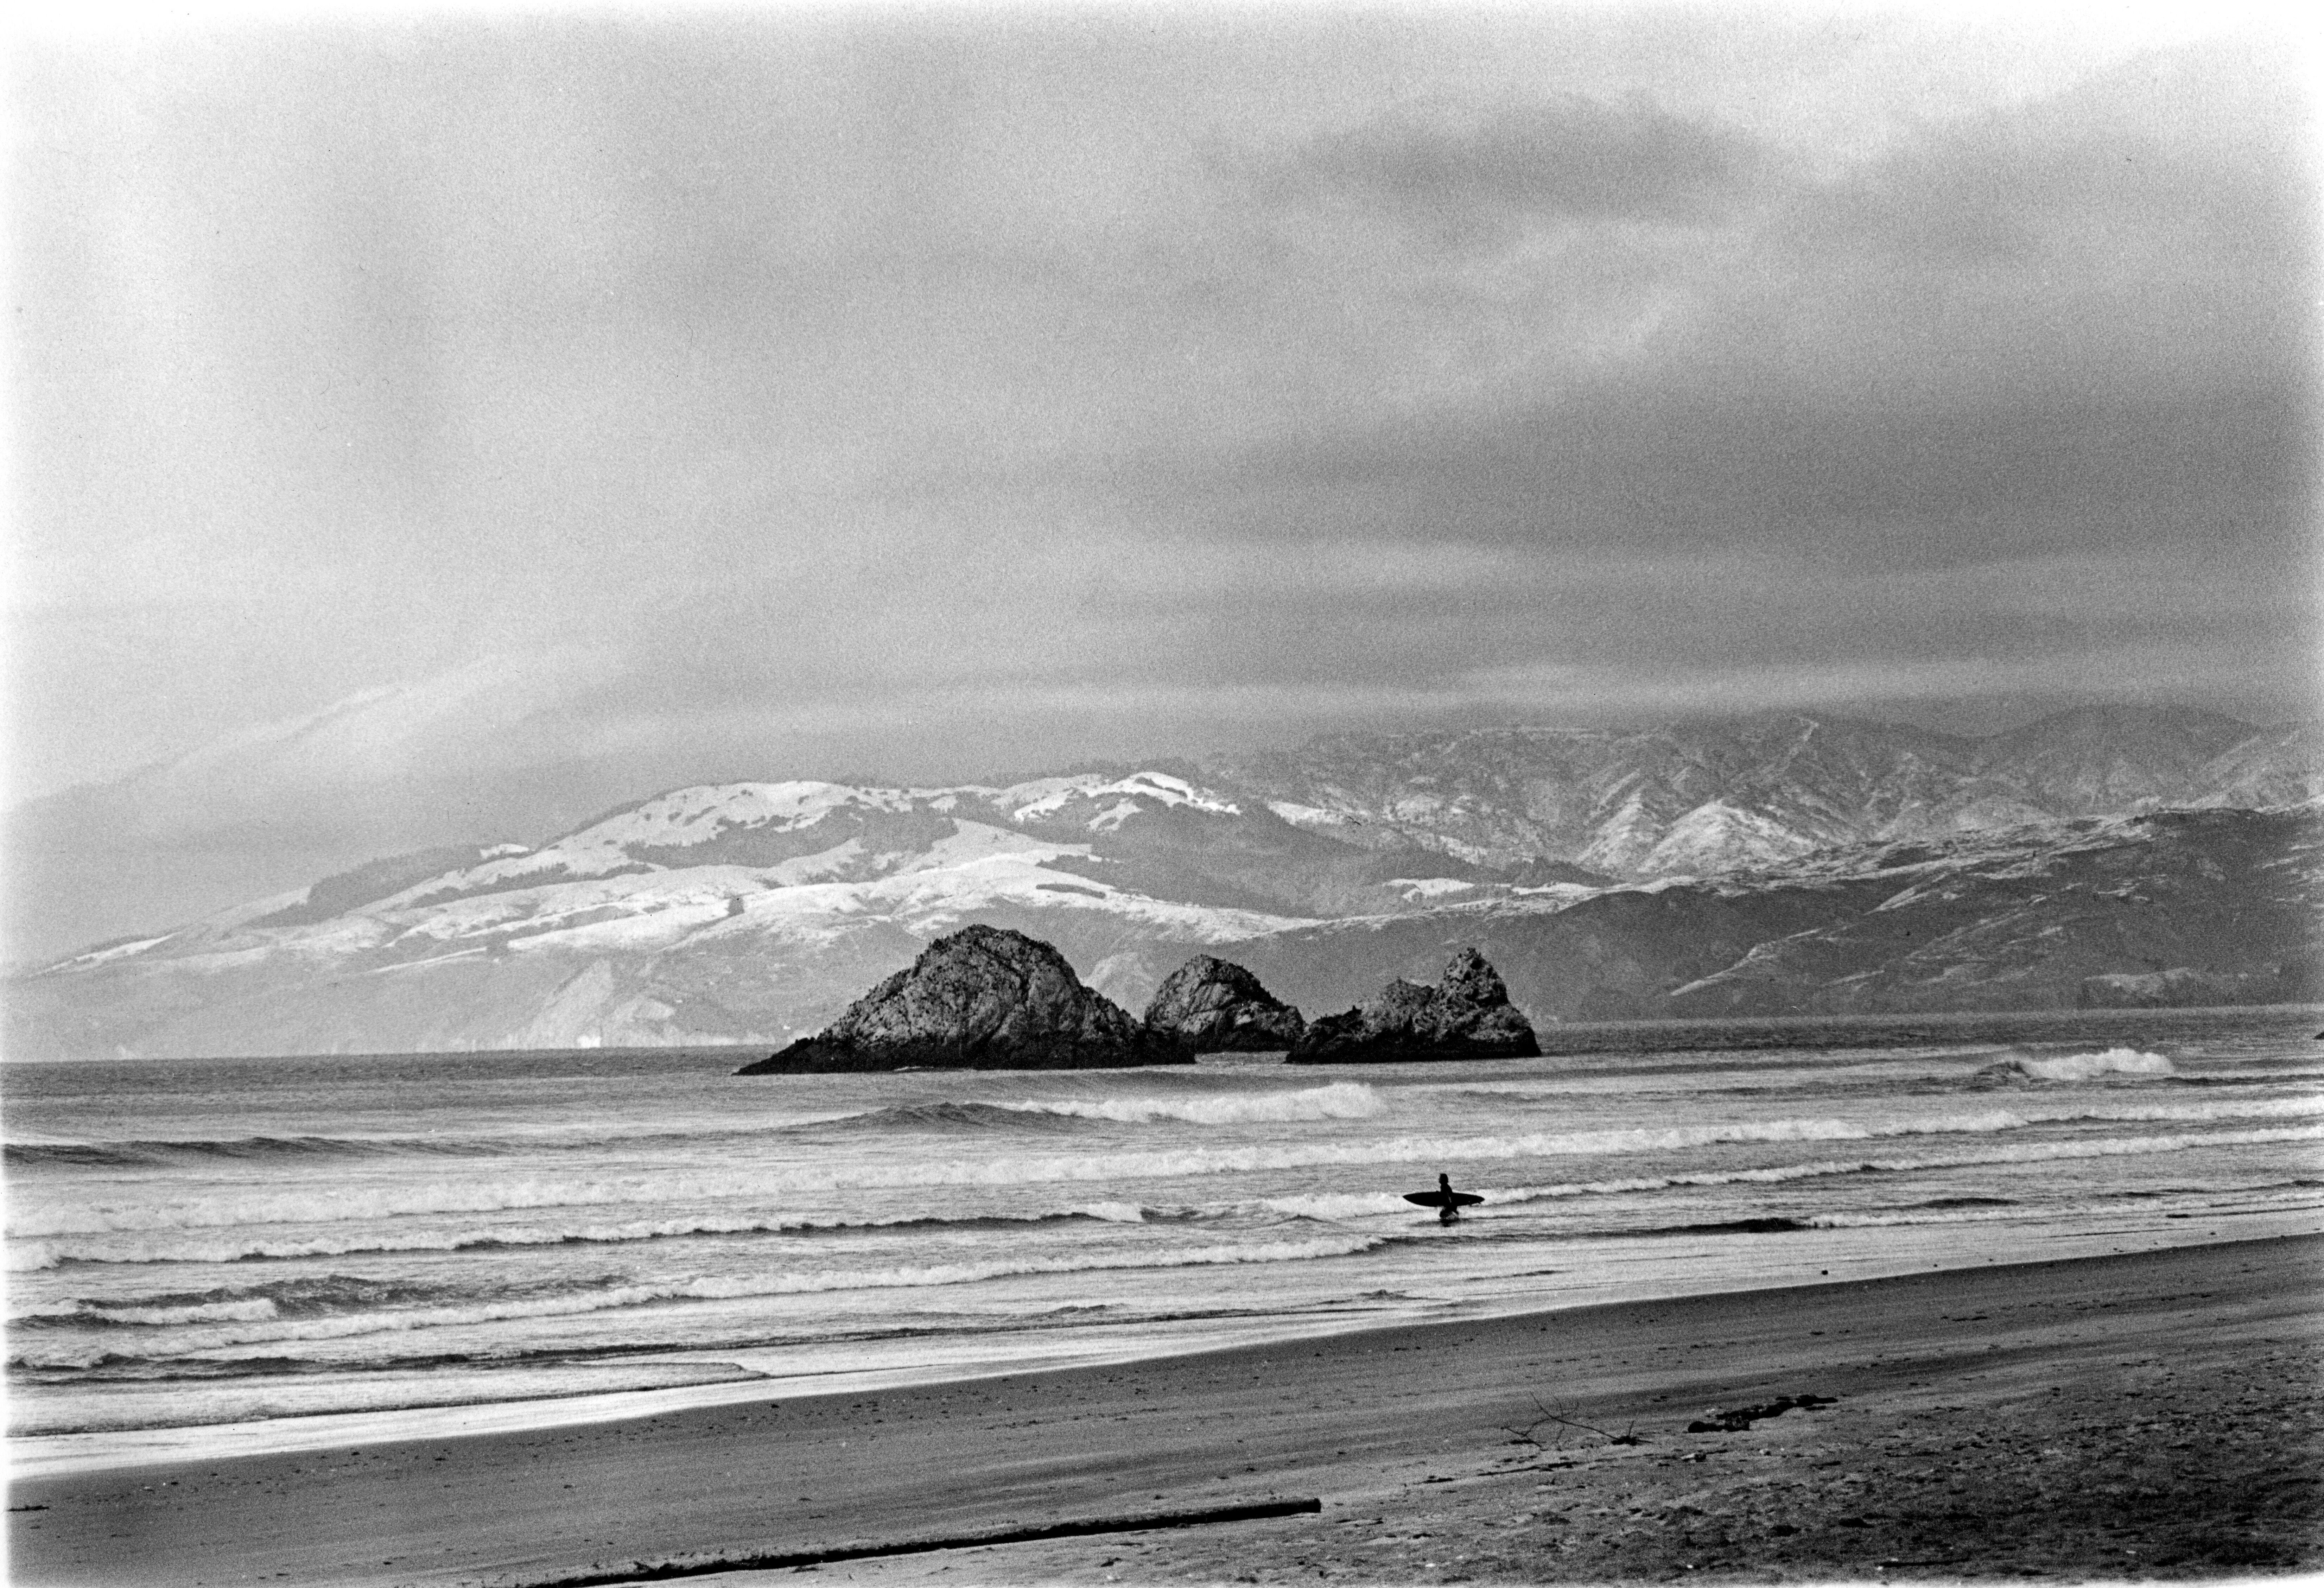 Surfer at Ocean Beach with snowy Marin Headlands in background